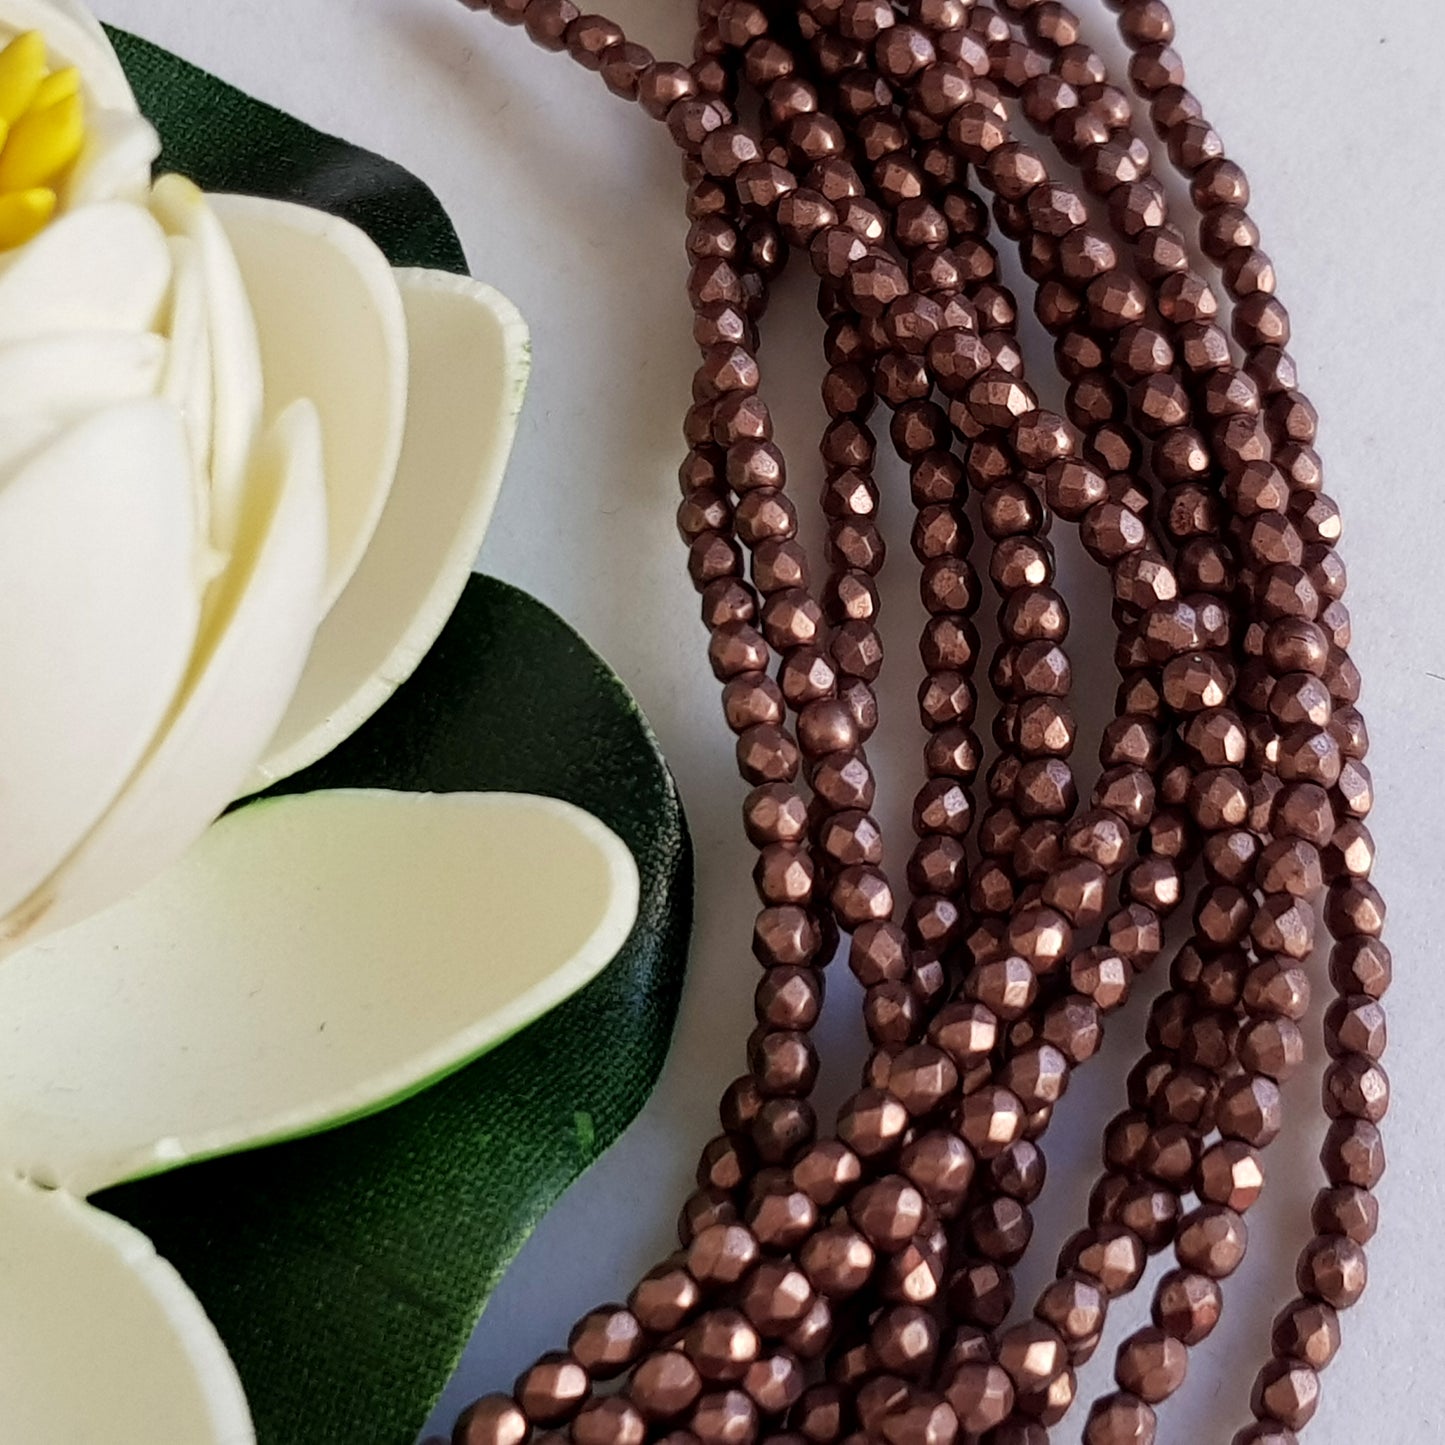 Czech Fire Polished 50 Bead Strand - Suede Gold Ash Rose 3mm Round Faceted  | FP-08A01-CB-03 | Beading Supply